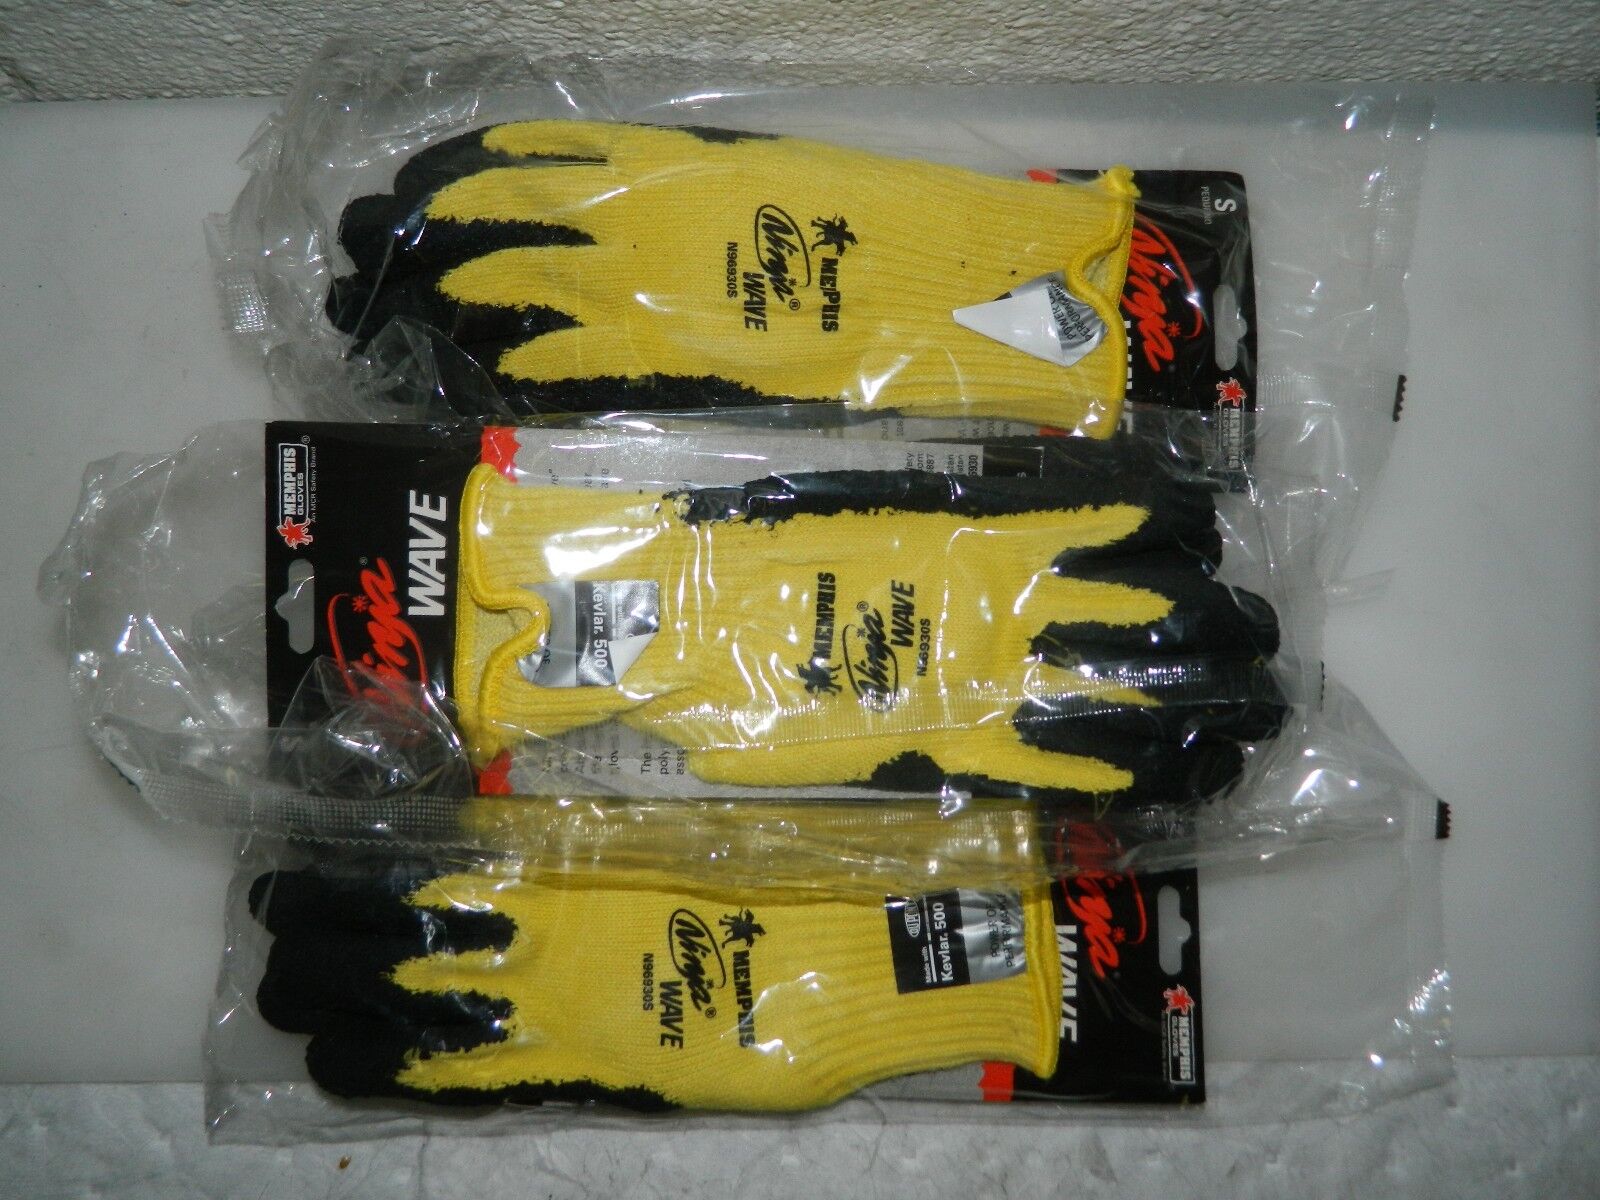 Mcr Ninja Wave Nitrile Coated Cut Resistant Gloves 12 Pairs Size S (7)  N96930s